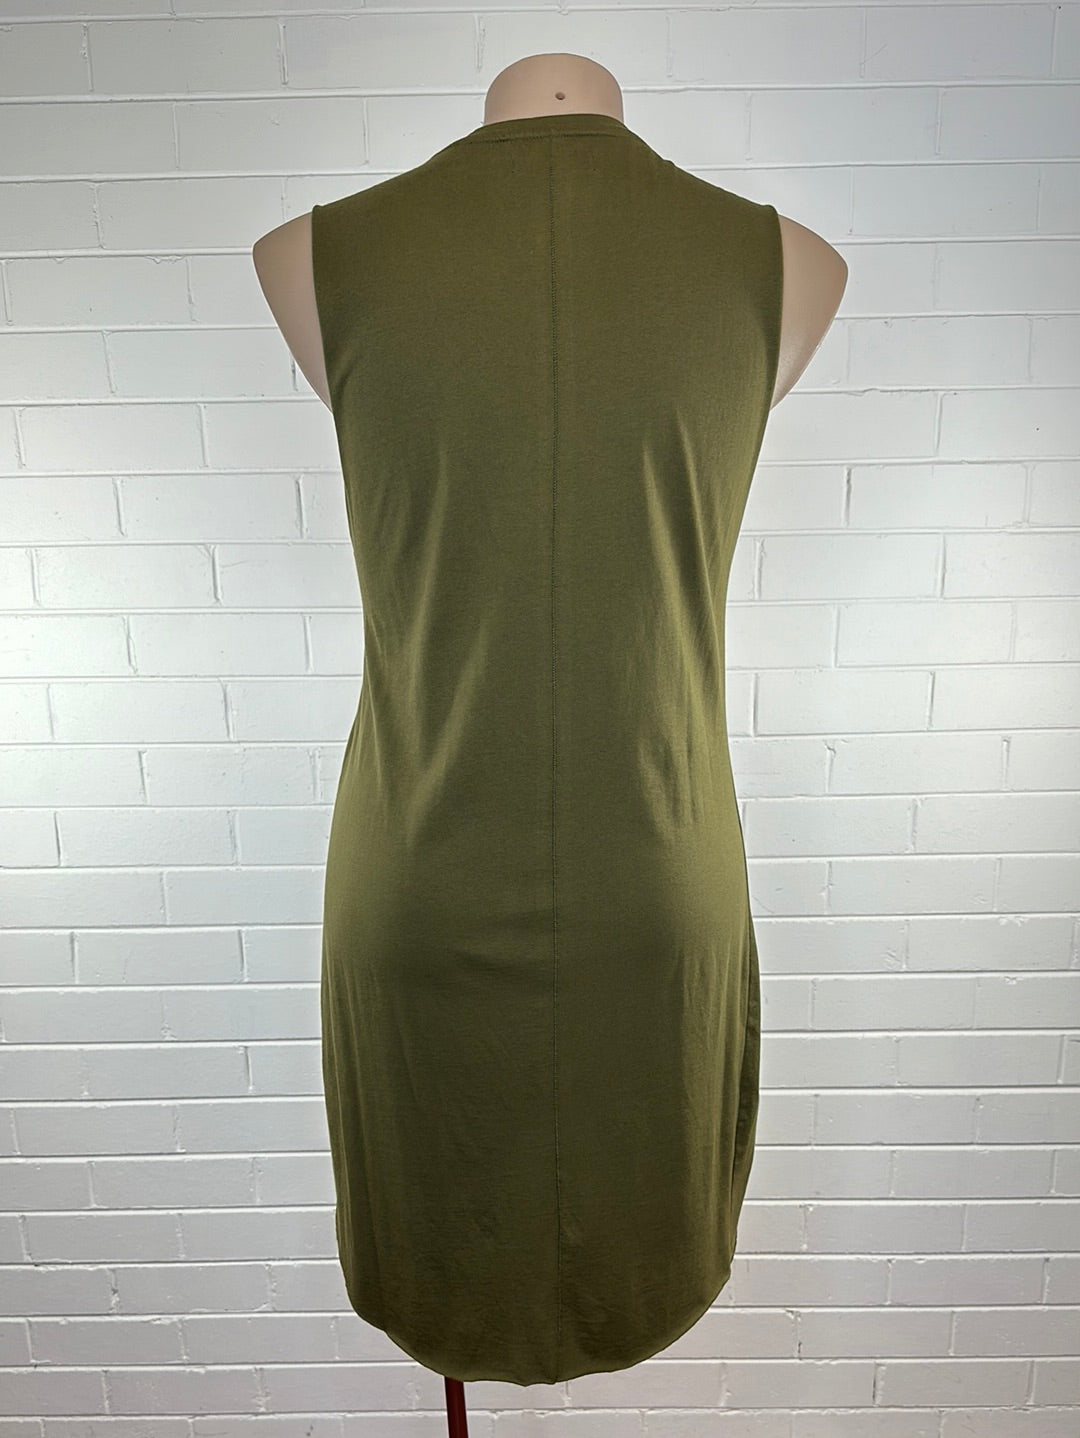 Nude Lucy | dress | size 14 | knee length | 100% cotton